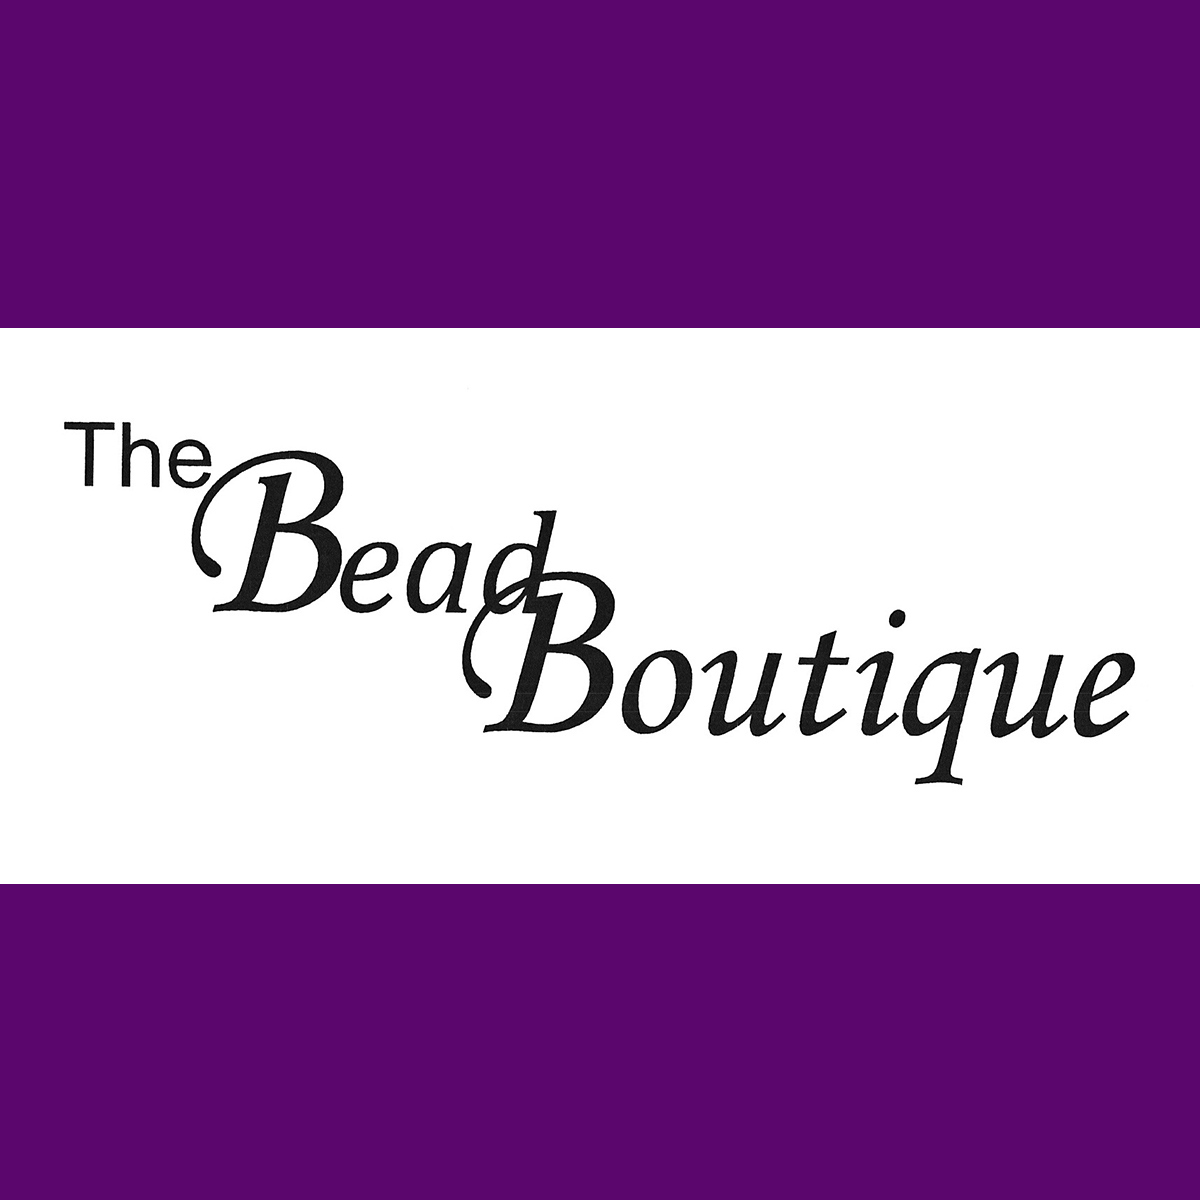 The Bead Boutique Inc.